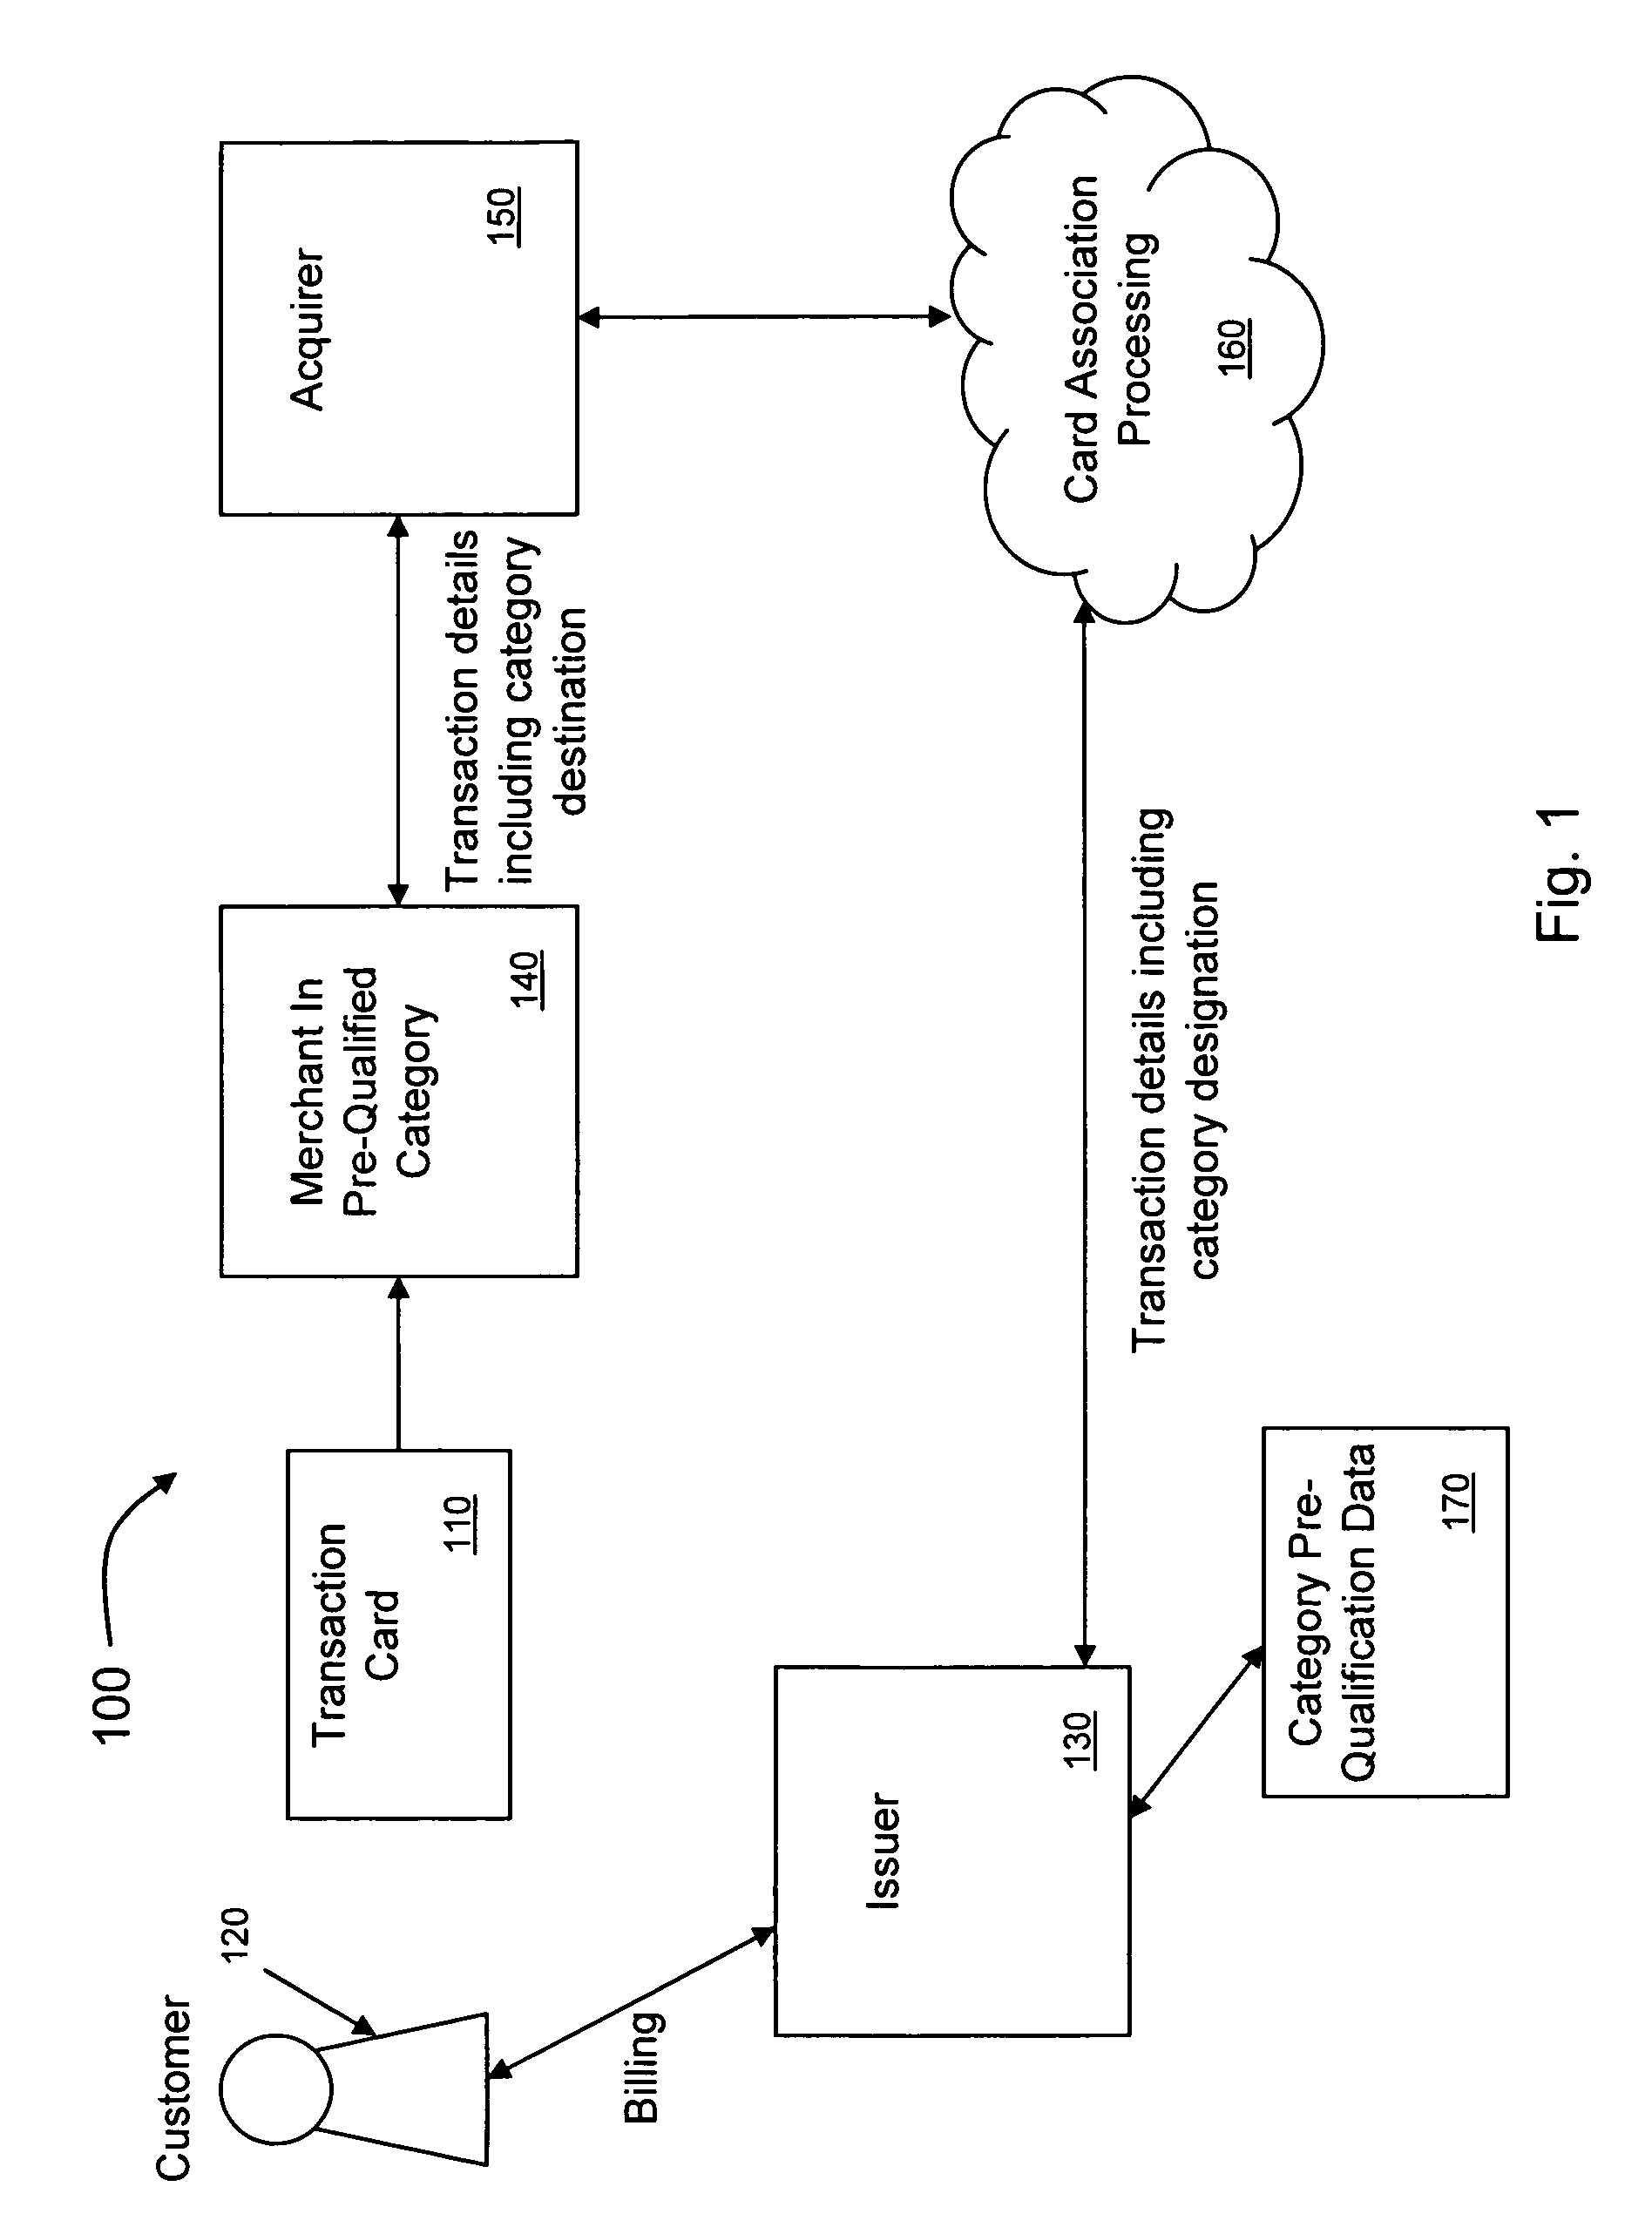 Methods and systems for managing transaction card accounts enabled for use with particular categories of providers and/or goods/services